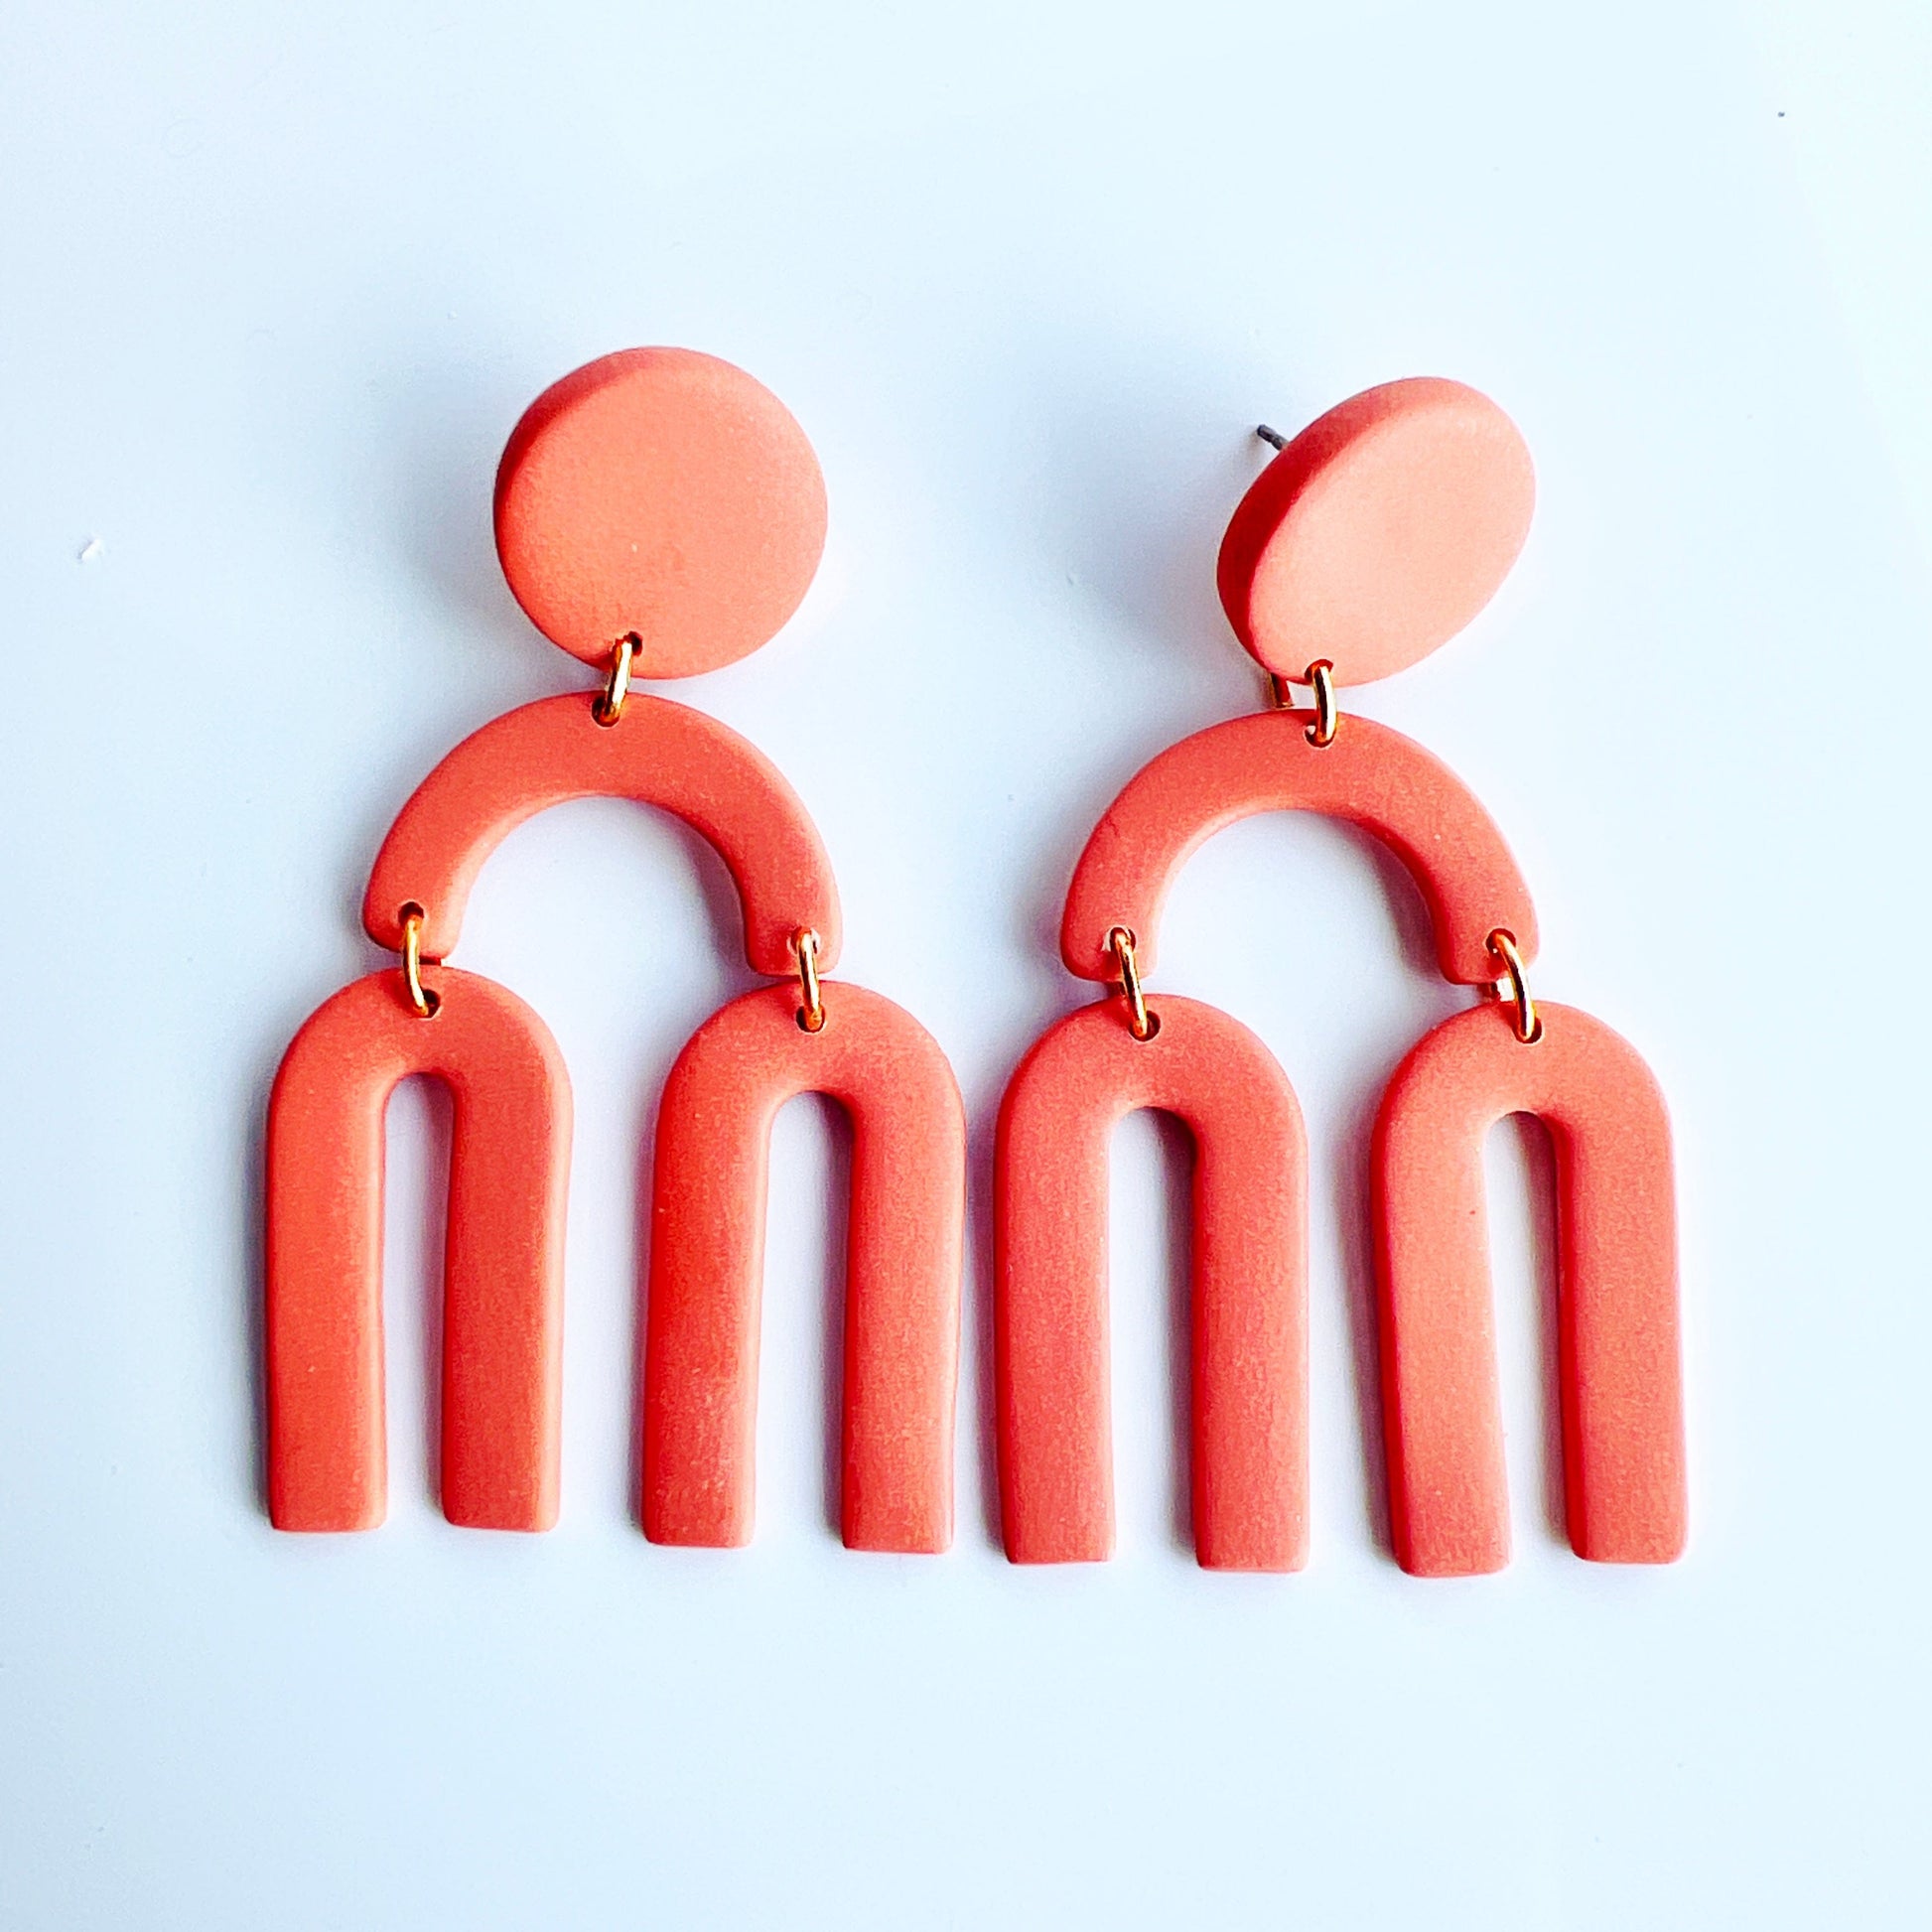 Earrings Asahi - Orange Circle Studs with Hanging Arches